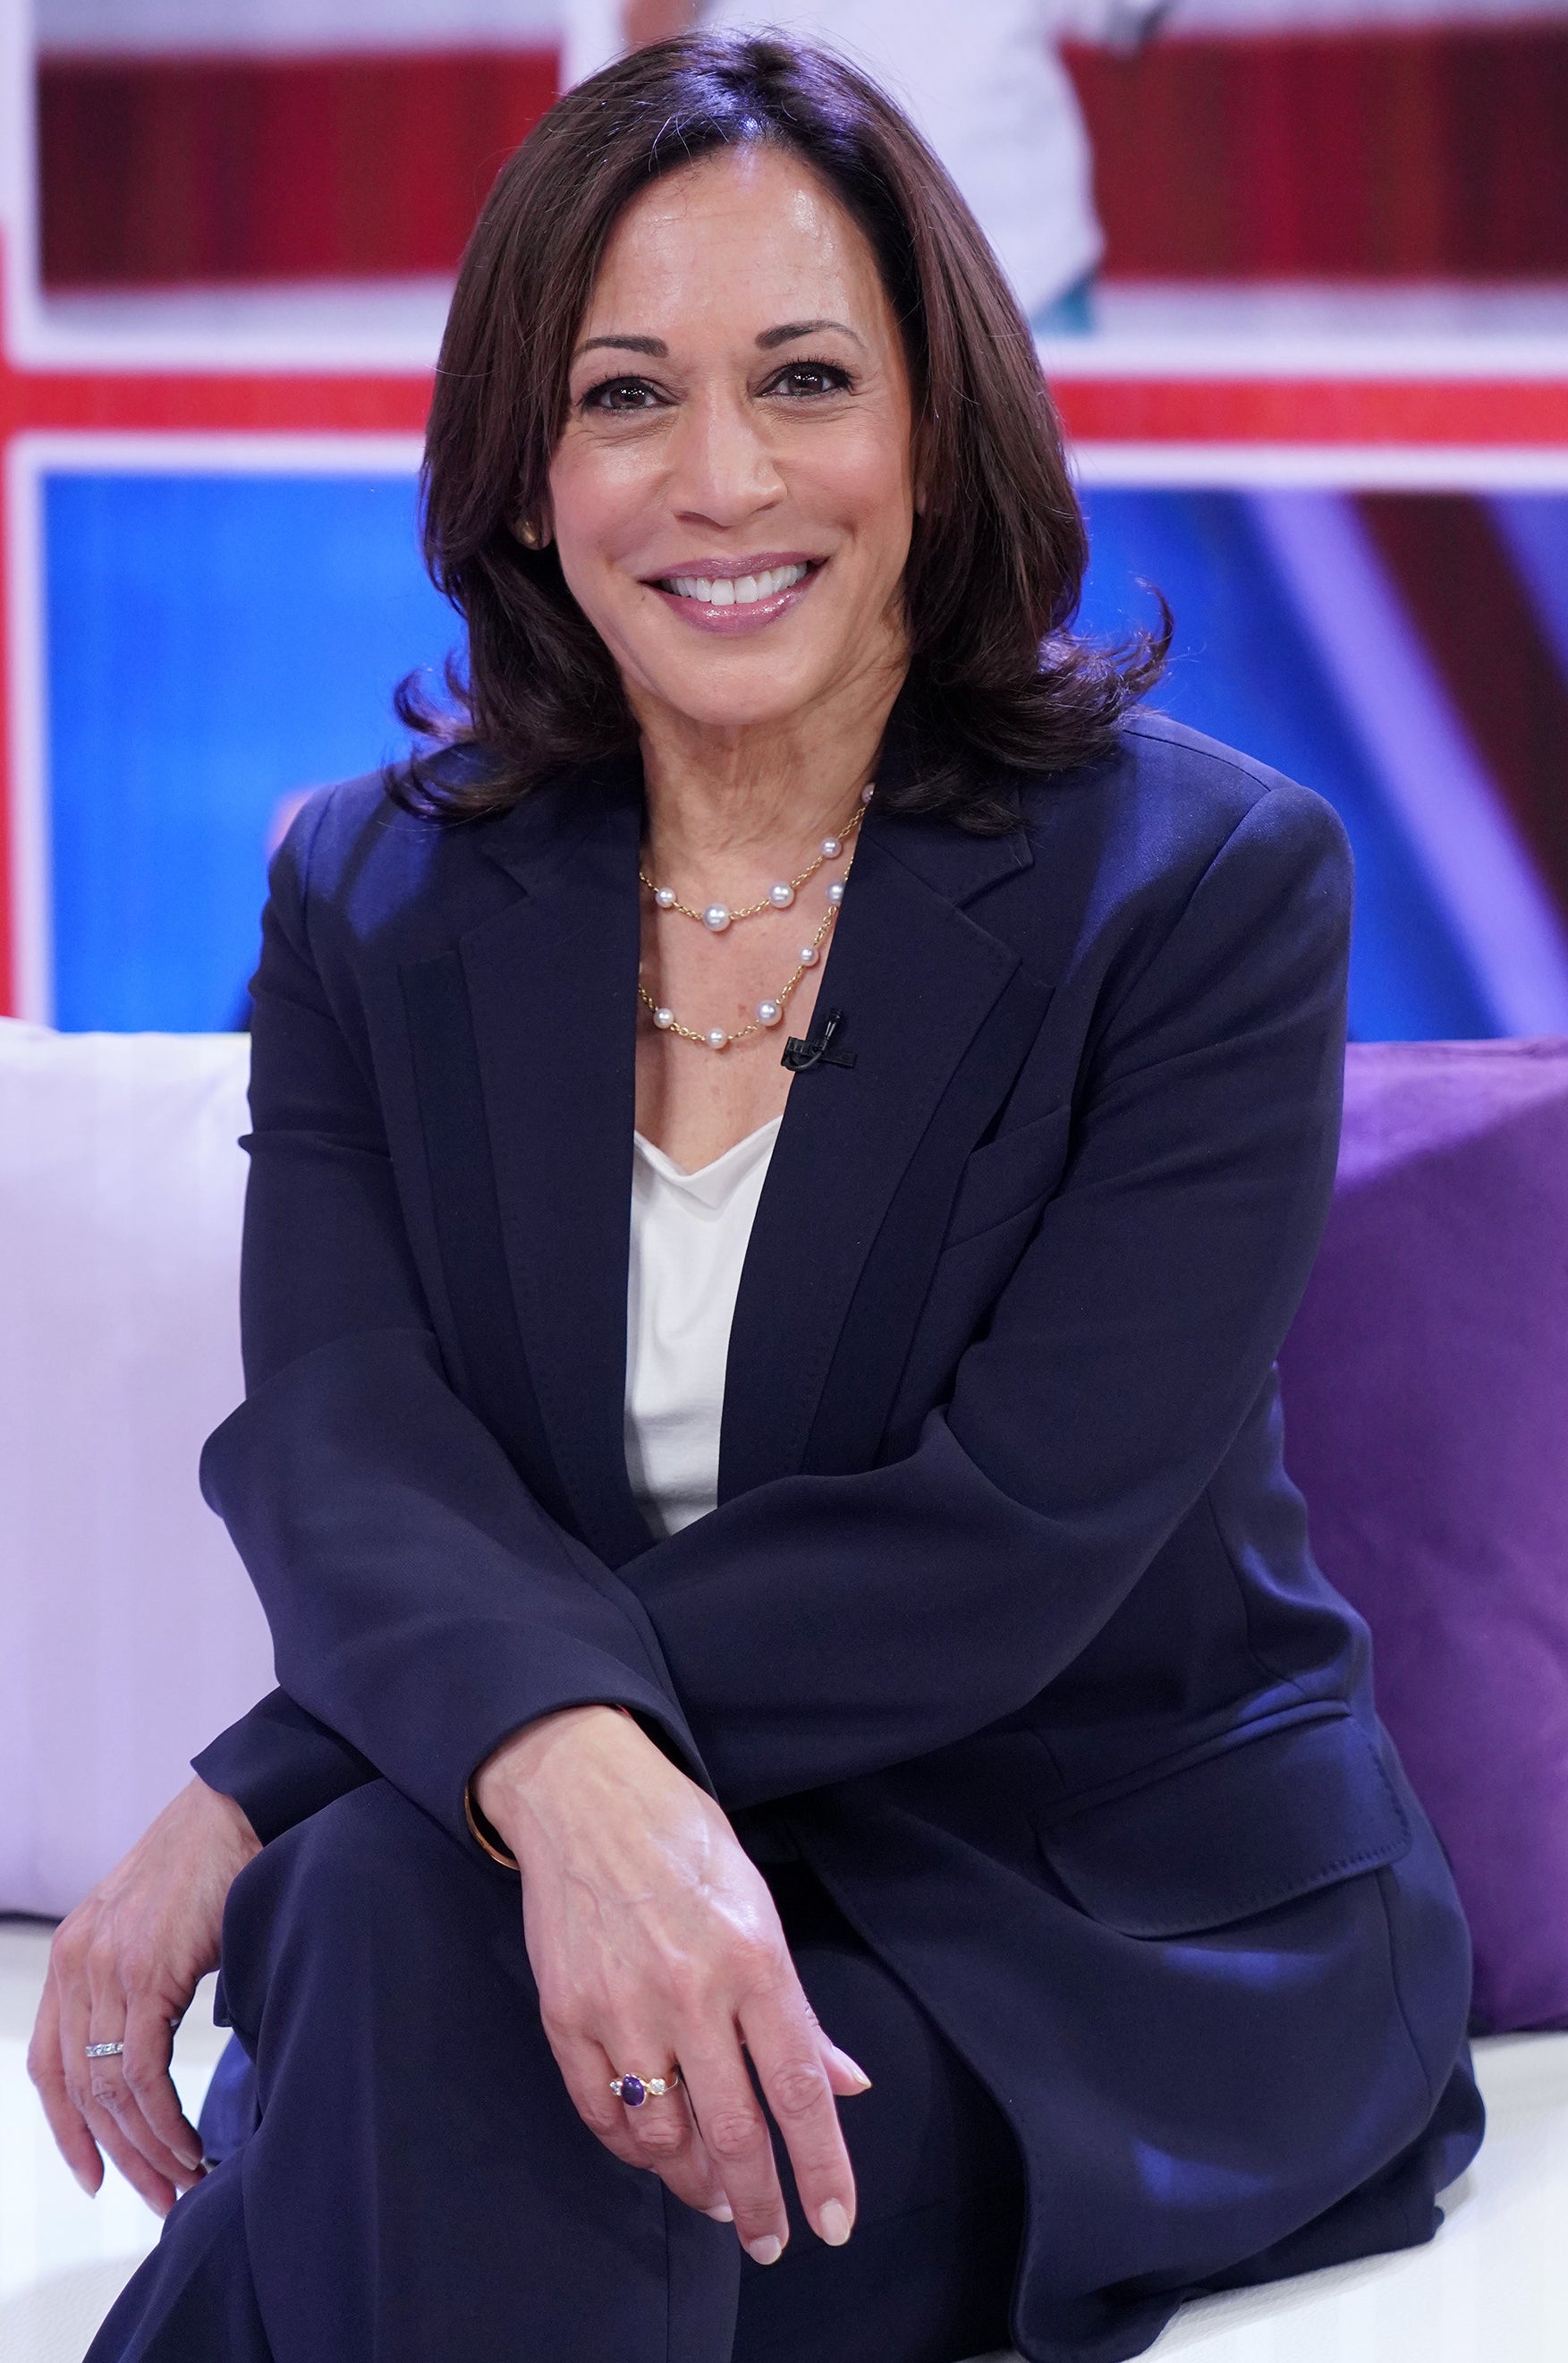 Kamala Harris smiling as she sits on a talk show couch in a navy blue suit with a white shirt